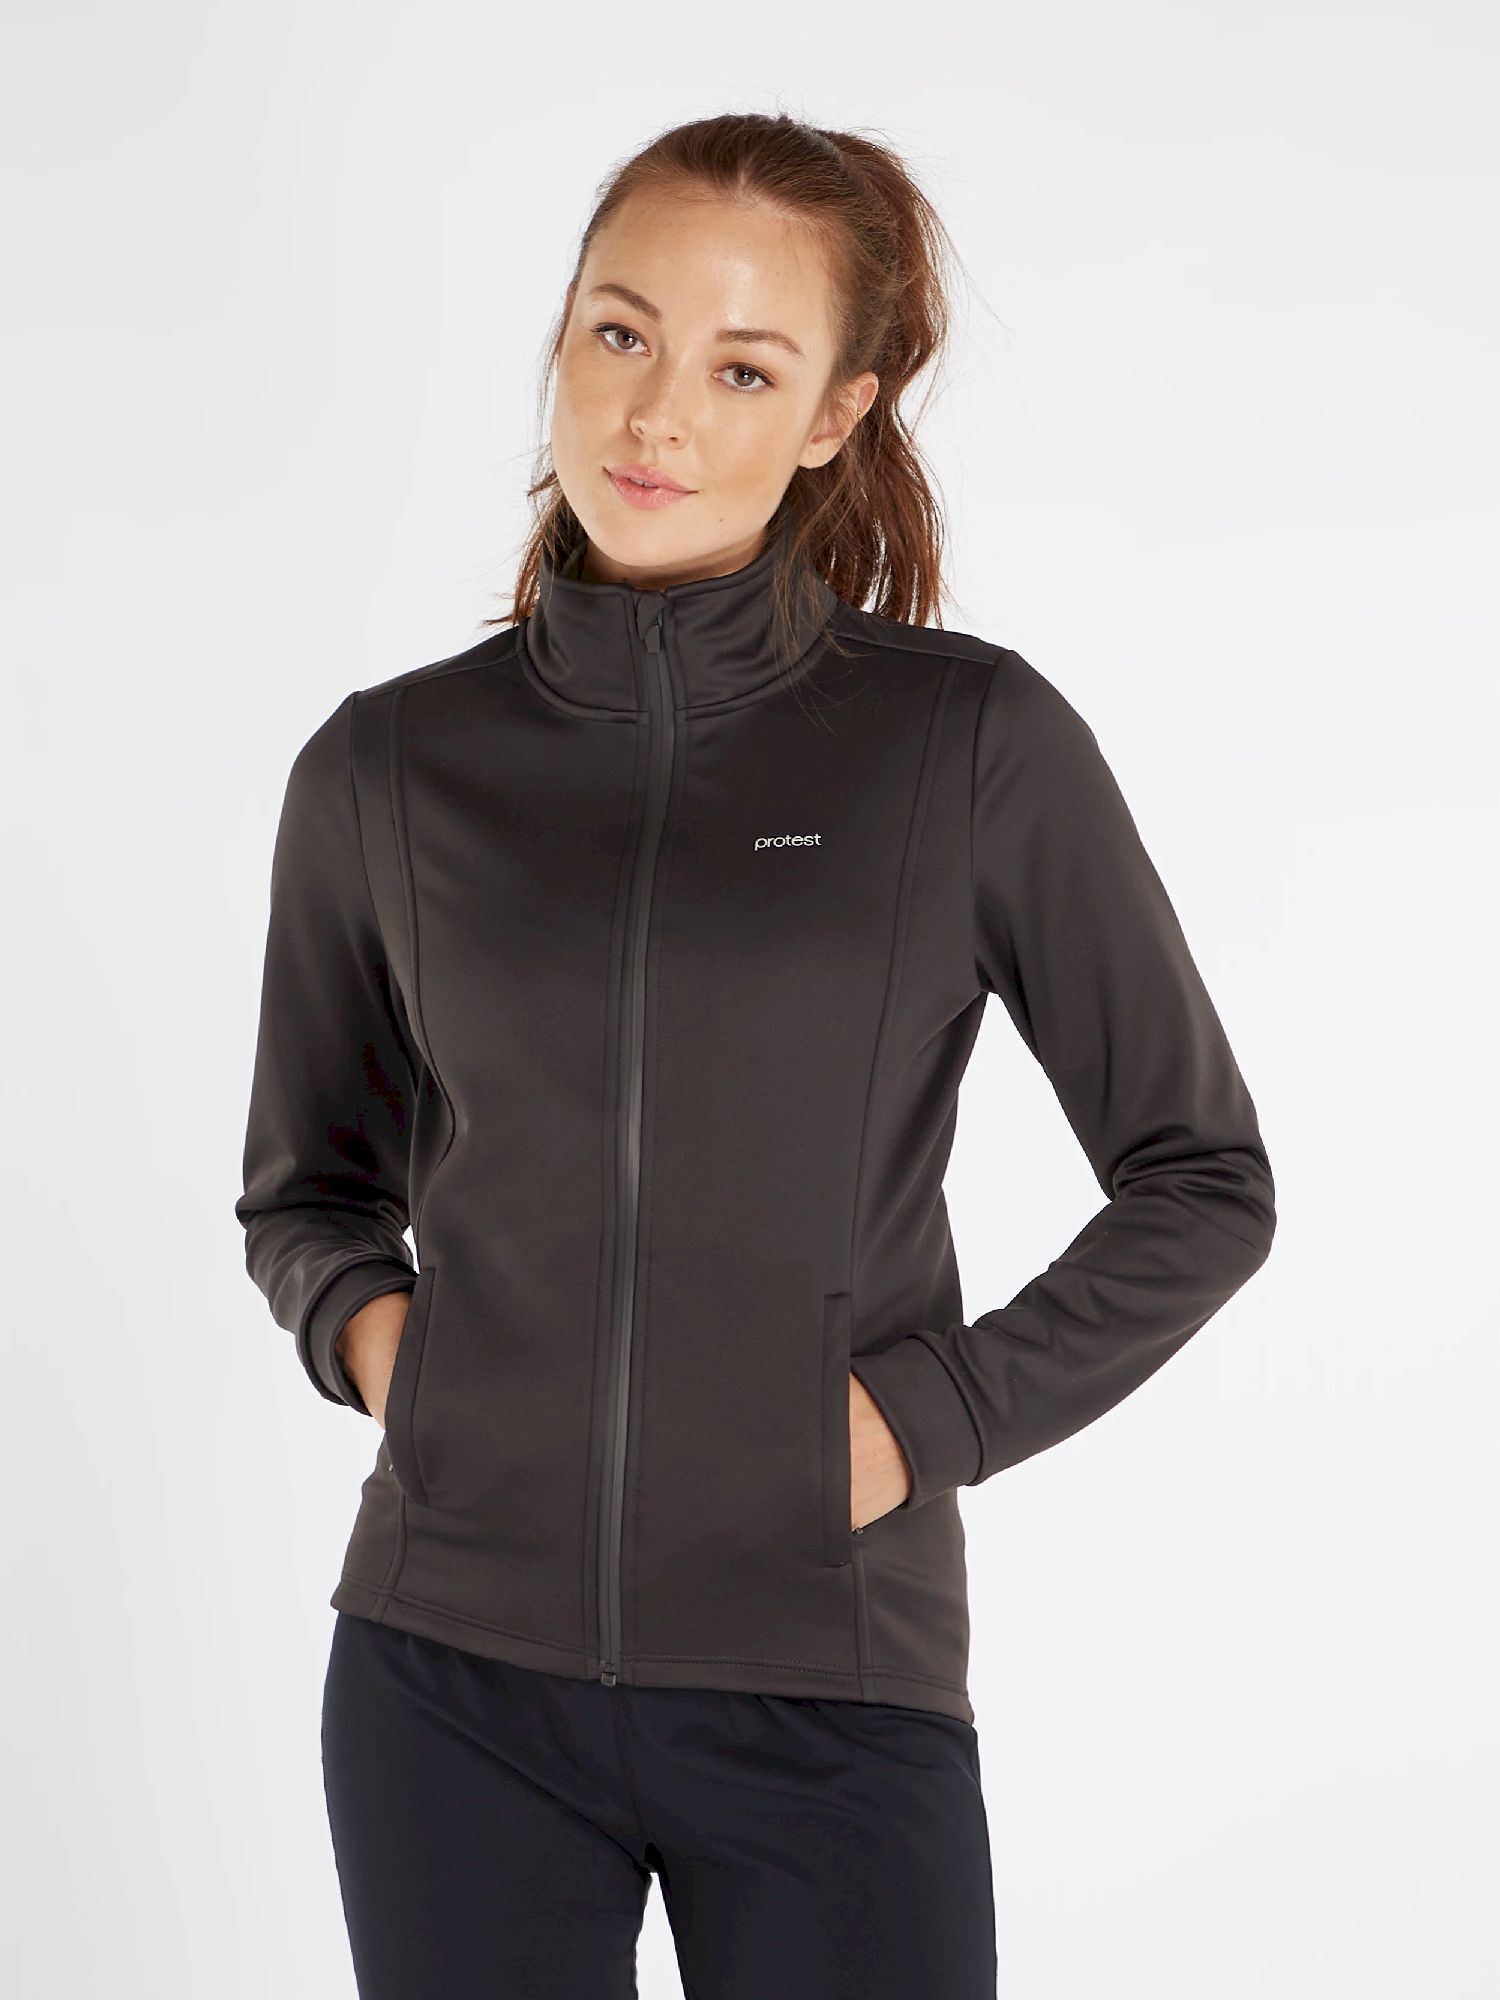 Protest Prtraisin - Giacca softshell - Donna | Hardloop